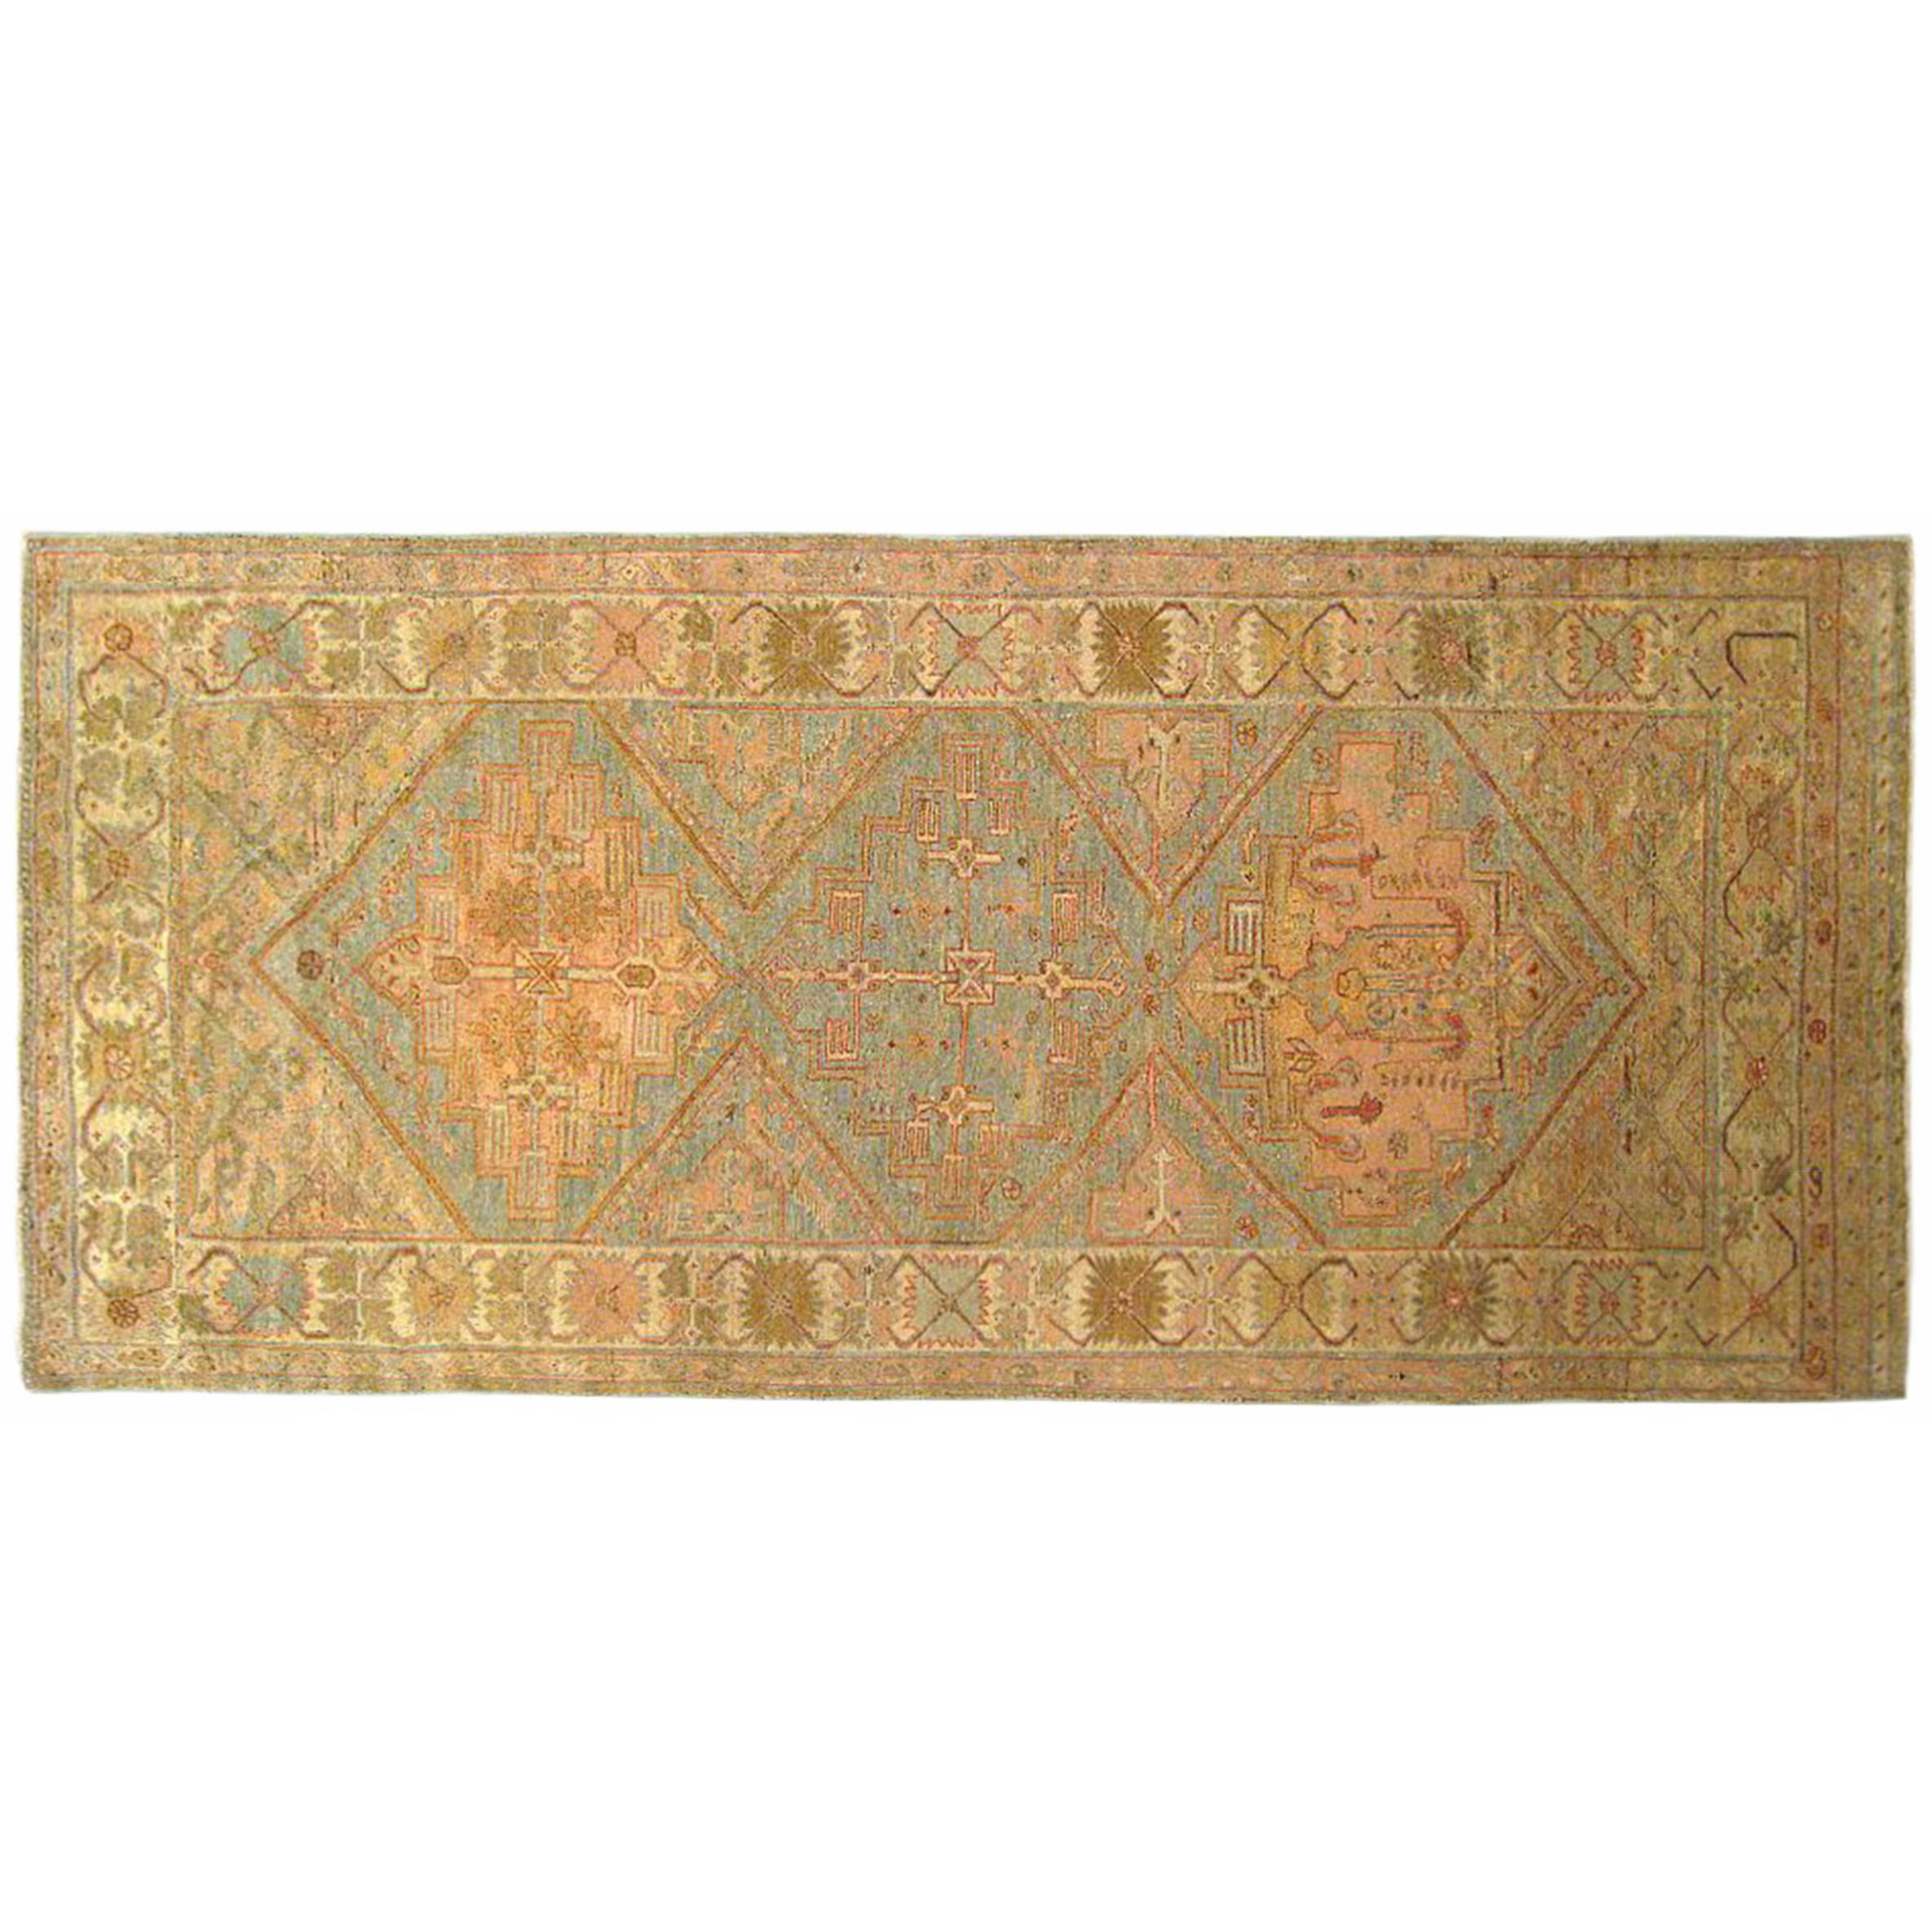 Antique N.W. Persia Decorative Oriental Carpet, in Small Runner Size, Soft Color